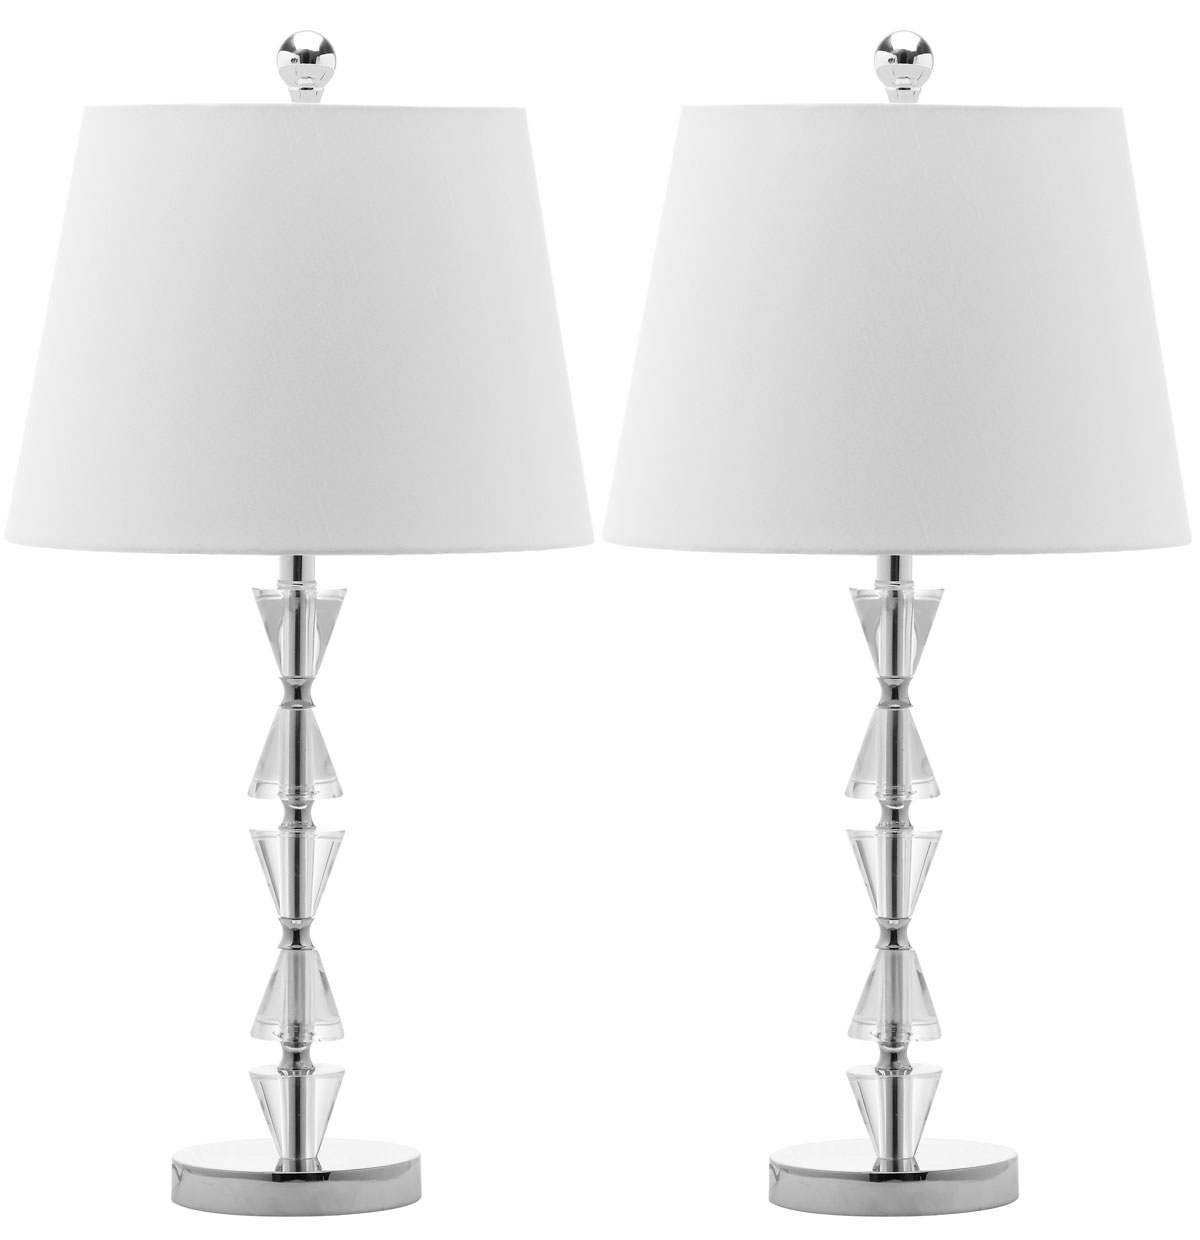 Deco 24.5-Inch H Prisms Crystal Table Lamp - Clear - Arlo Home - Image 2